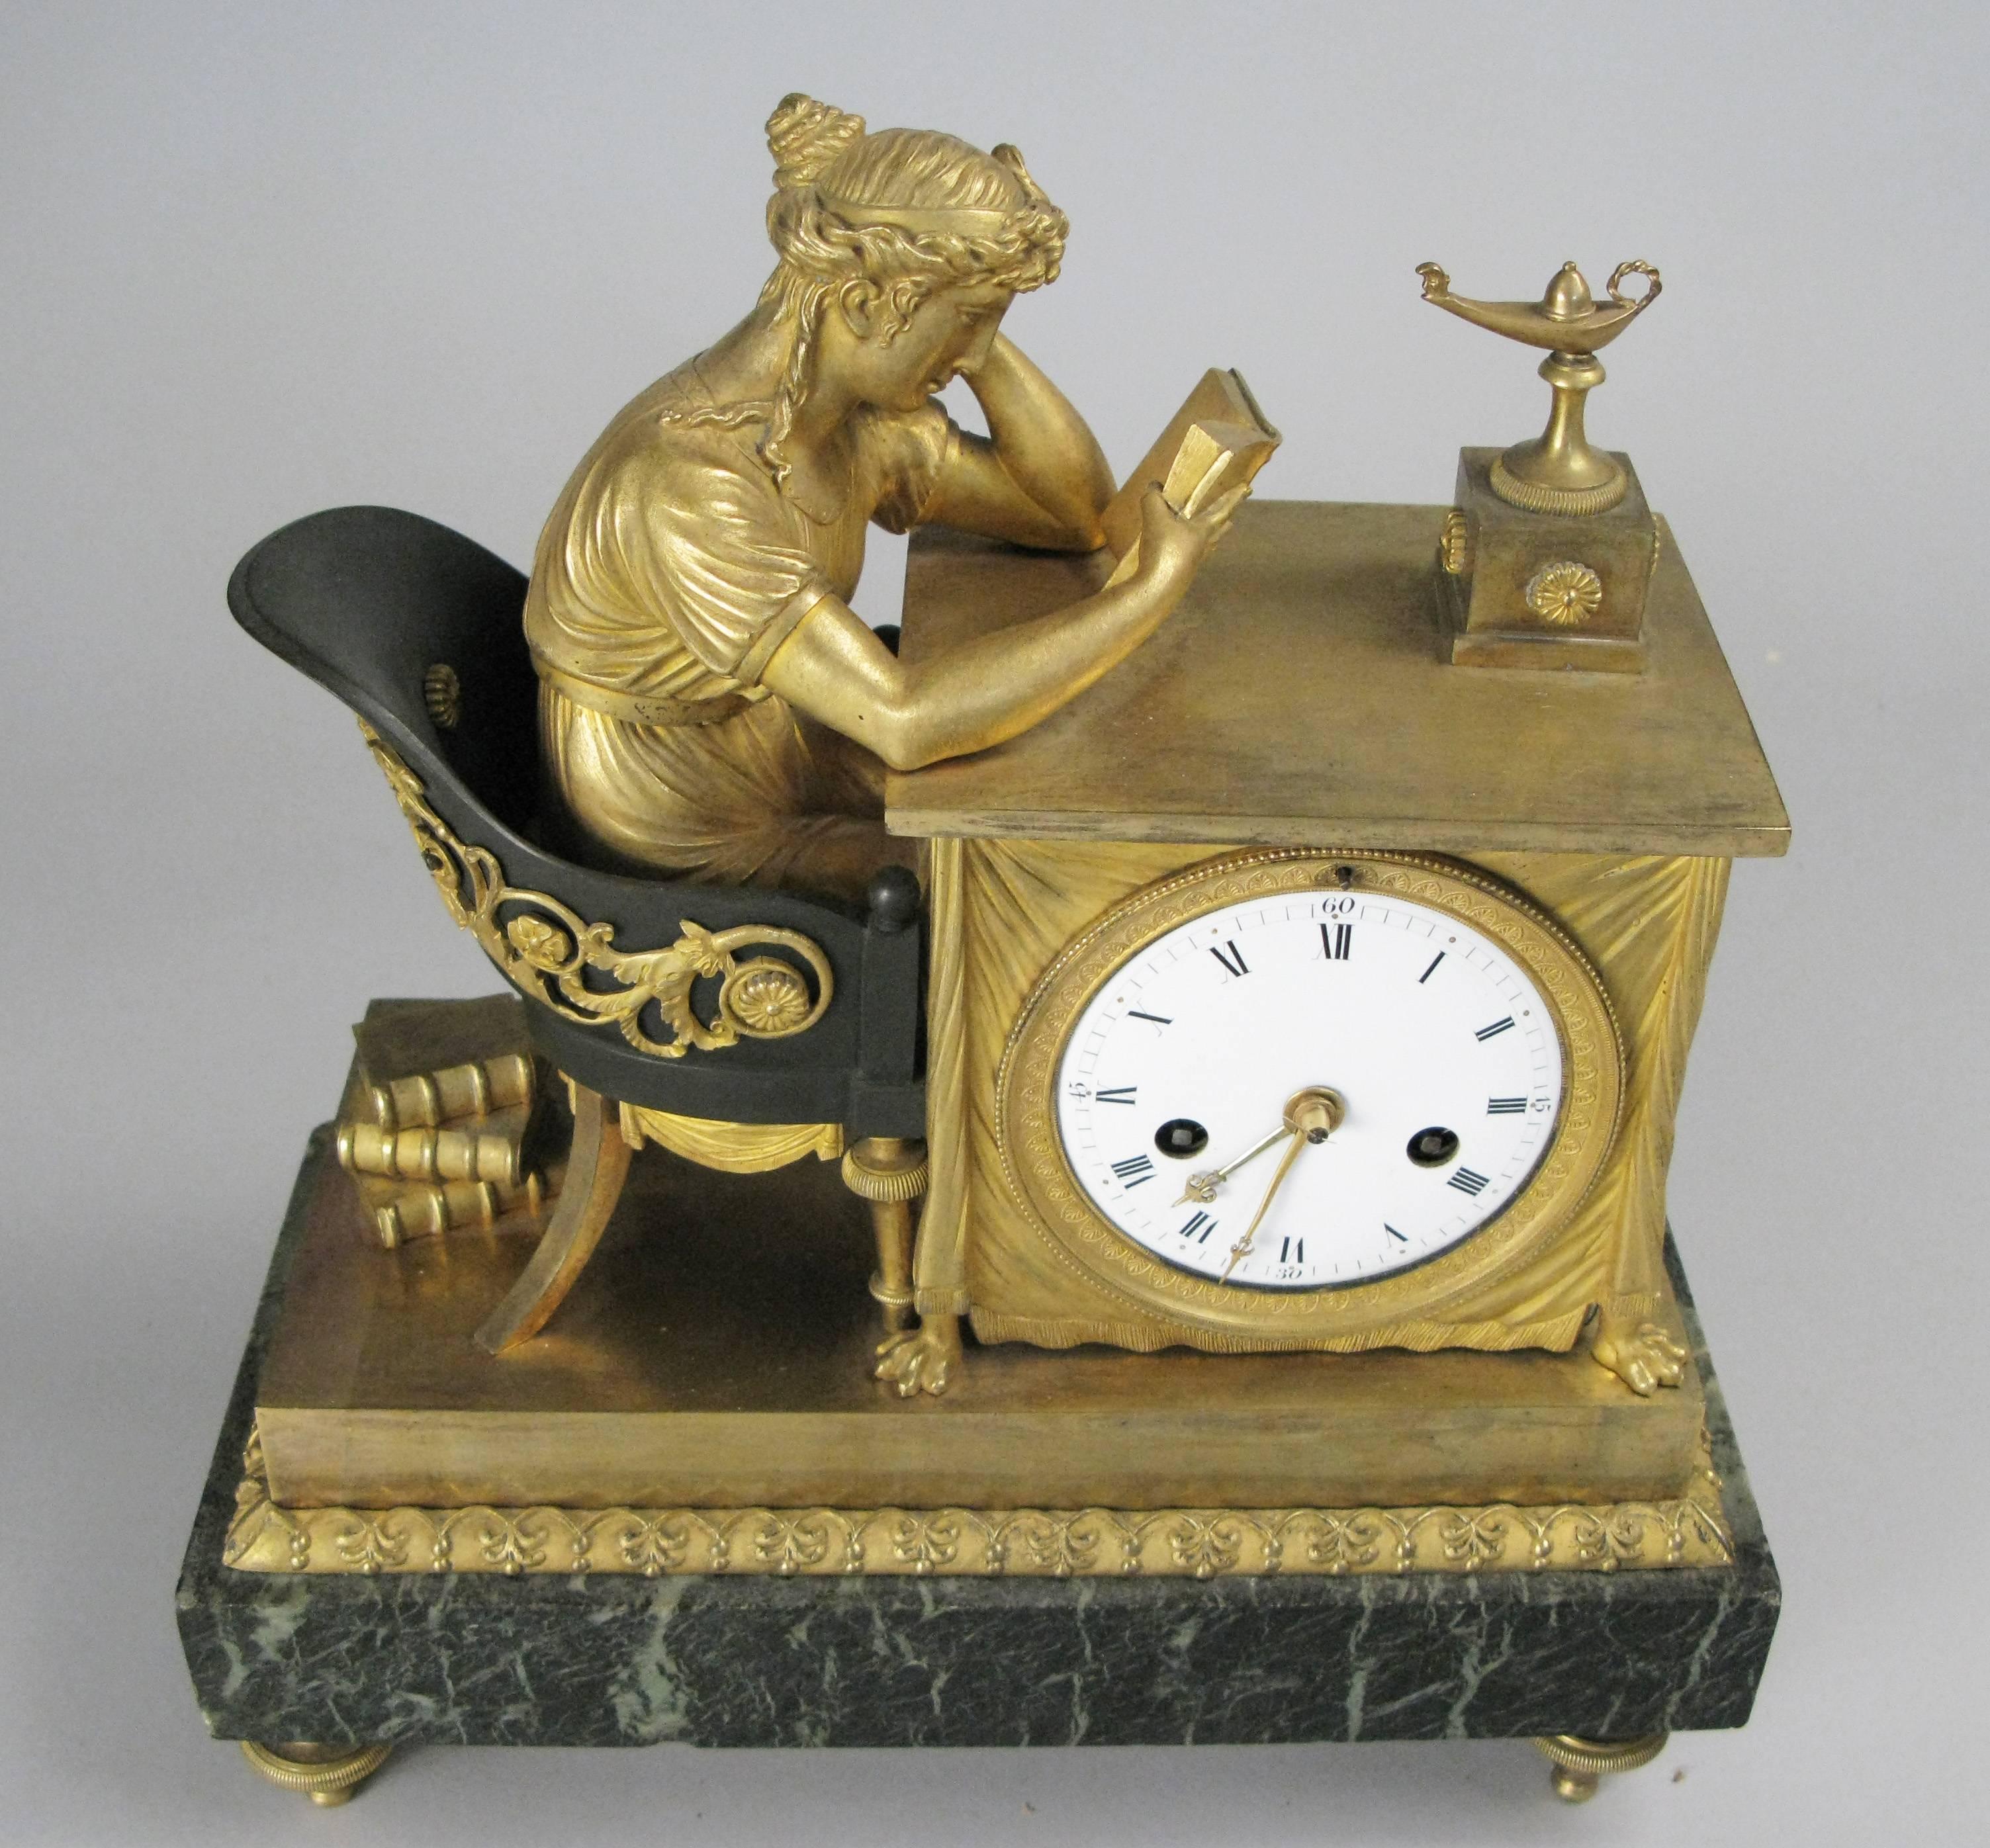 A very beautiful and elegant antique 1860s French empire mantel clock with a marble base and gilt bronze case, adorned with a classical female figure seated in an ormolu and bronze chair reading. Beautiful condition and fully working keeping perfect